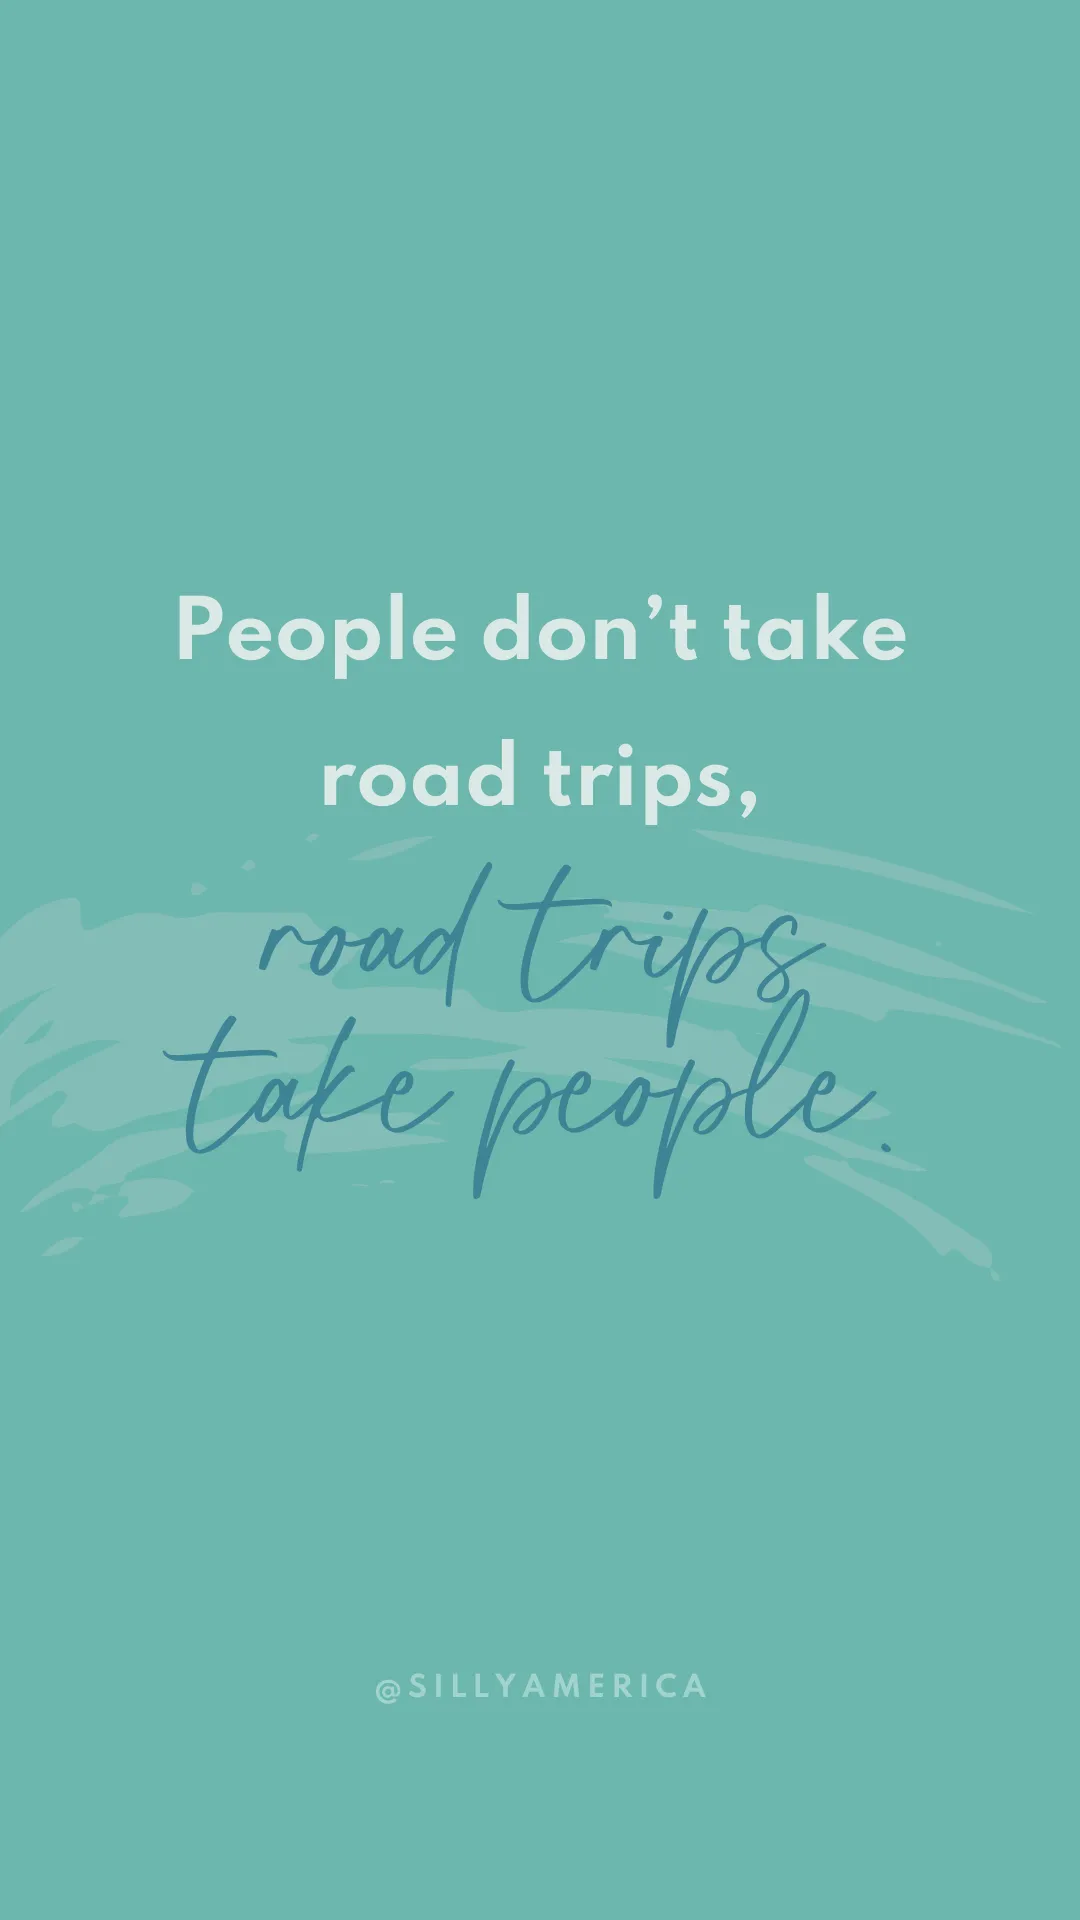 People don’t take road trips, road trips take people. - Road Trip Captions for Instagram